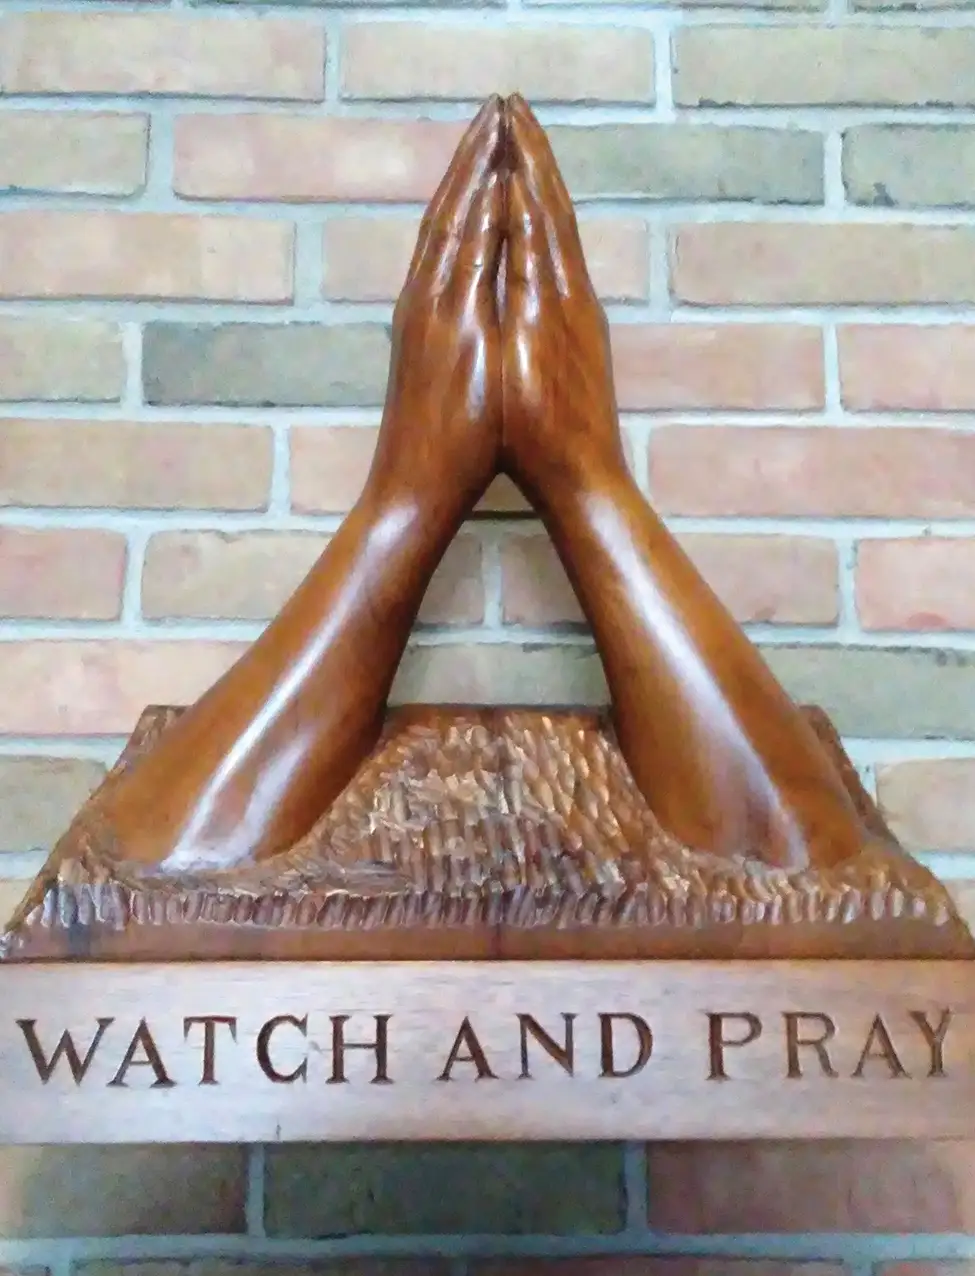 Wooden sculpture of praying hands on brick wall with the words watch and pray